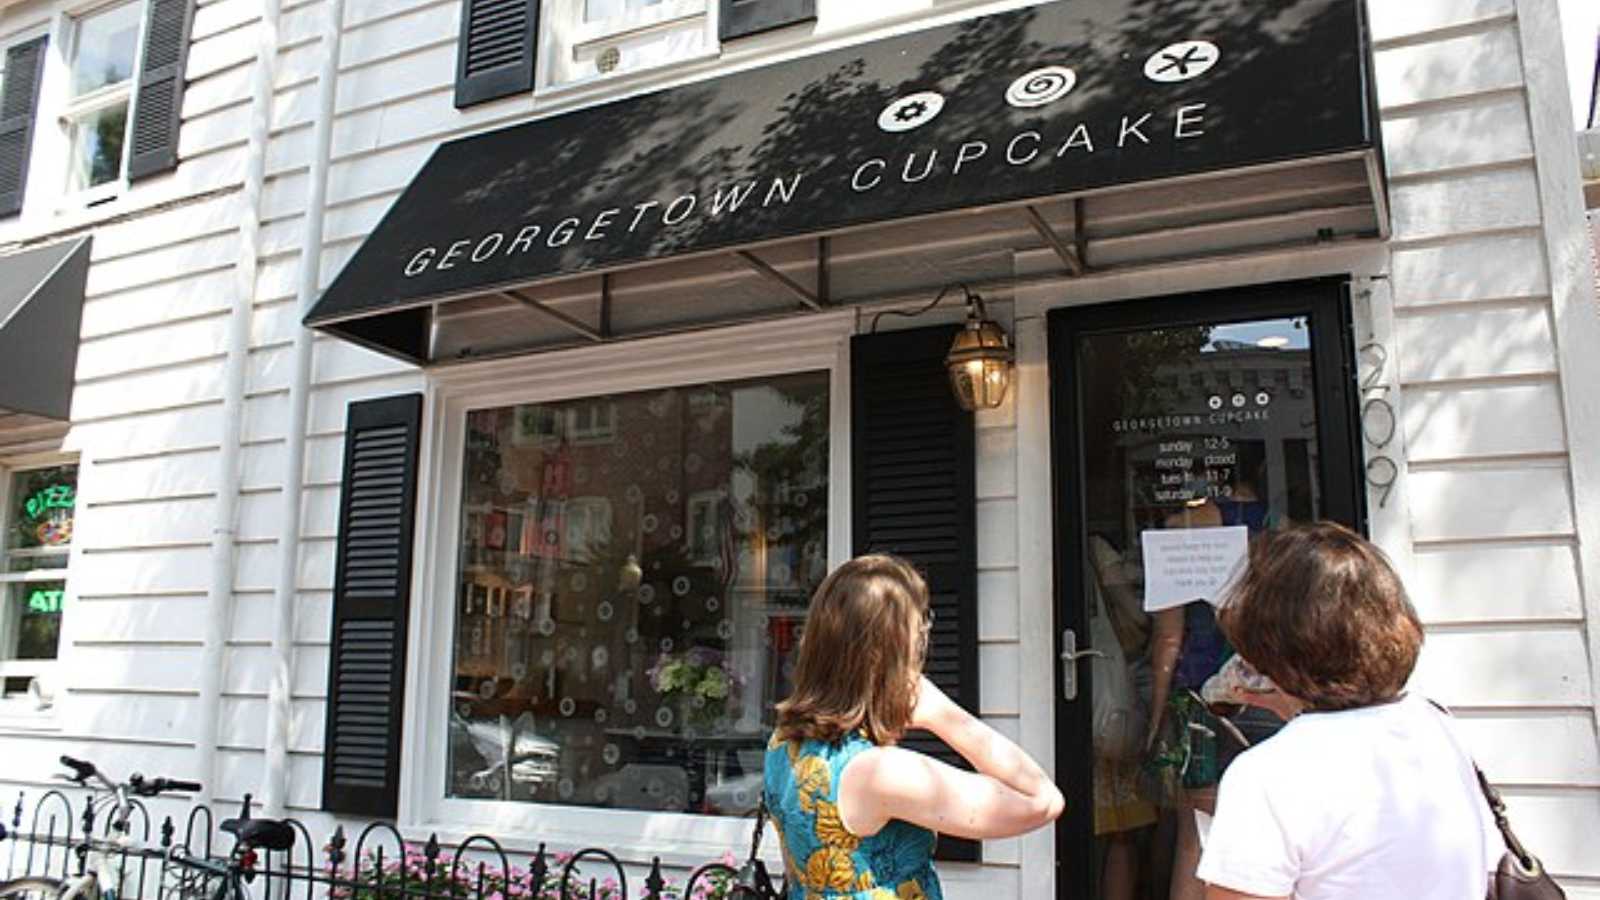 <p><span>Long lines and overpriced cupcakes make Georgetown Cupcakes a sugar-coated disappointment for many visitors. You're better off finding a local bakery without the hype.</span></p>